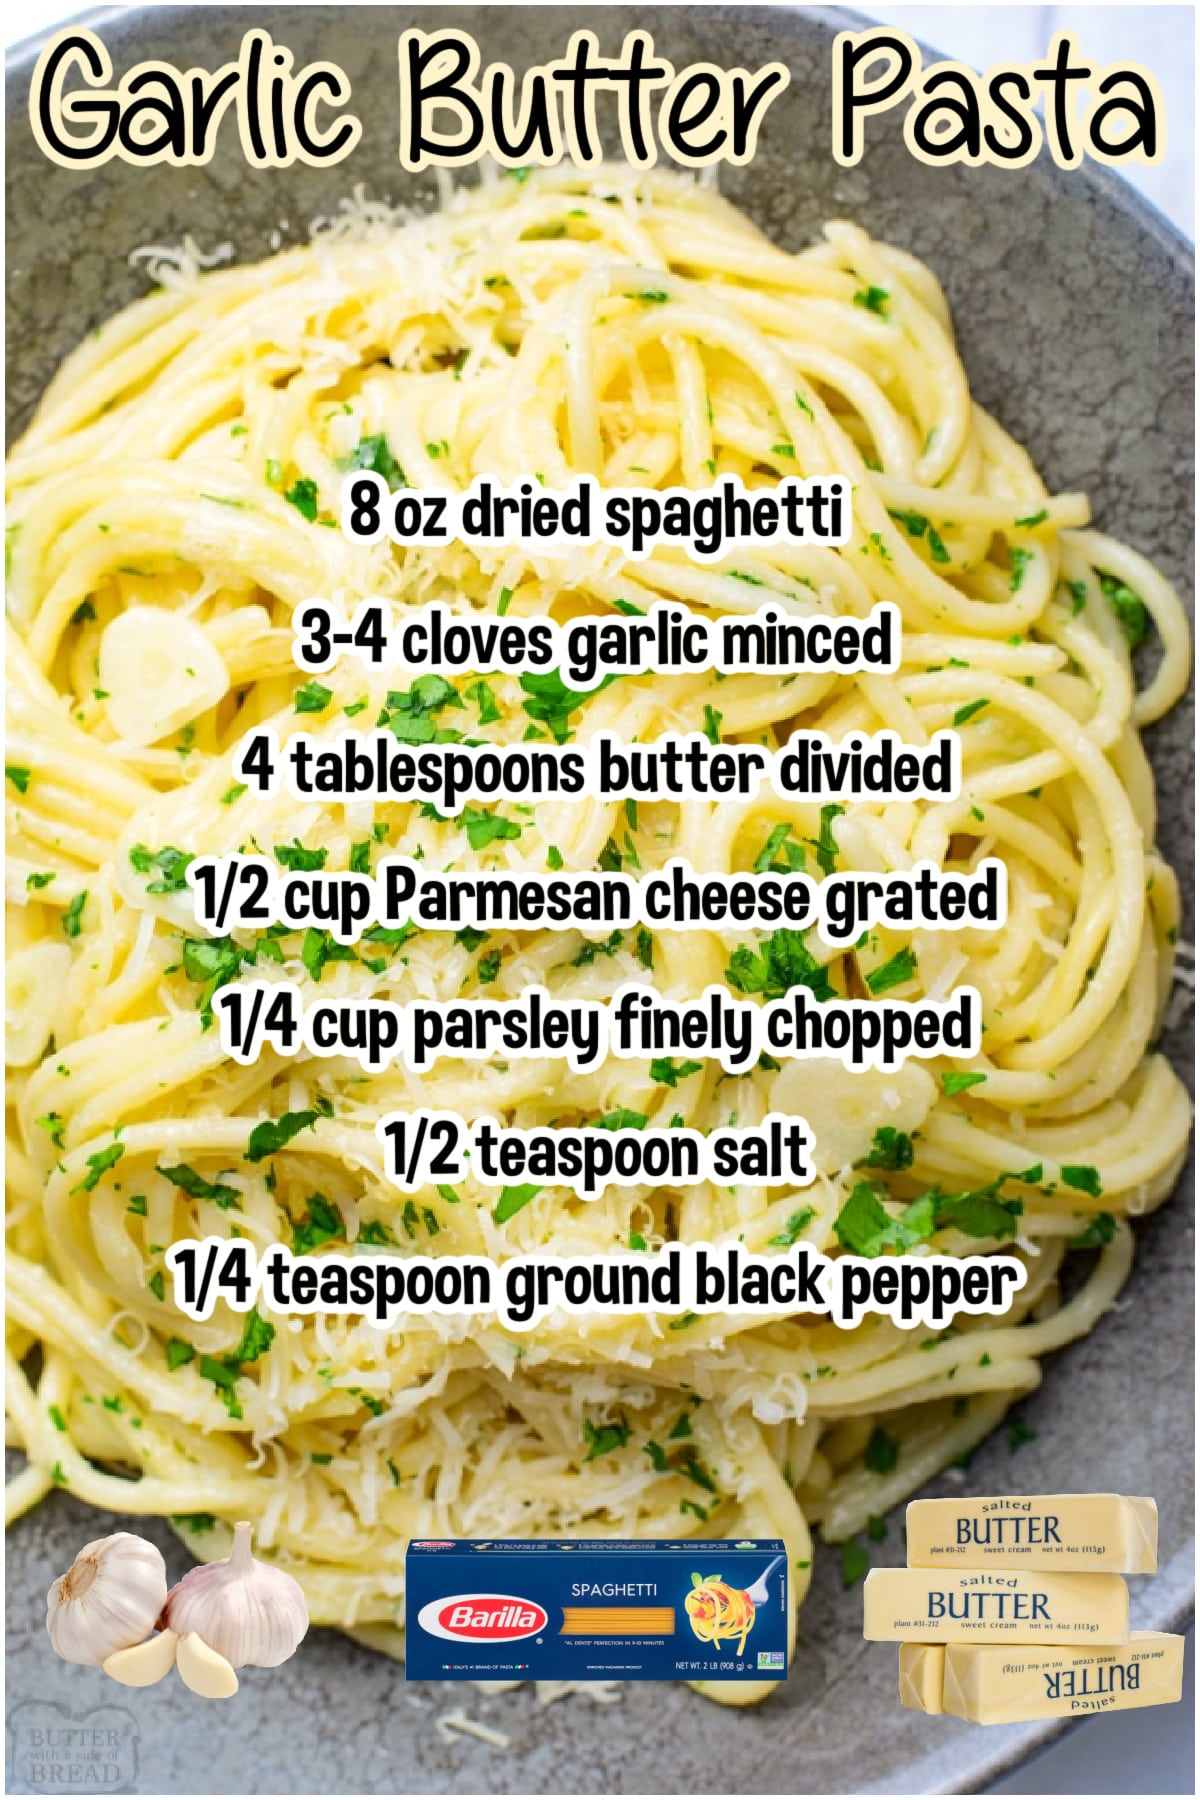 Garlic Butter Pasta recipe made with simple ingredients like spaghetti, garlic, butter & Parmesan cheese! Easy buttered pasta done in just 20 minutes & perfect for dinner or a side dish.